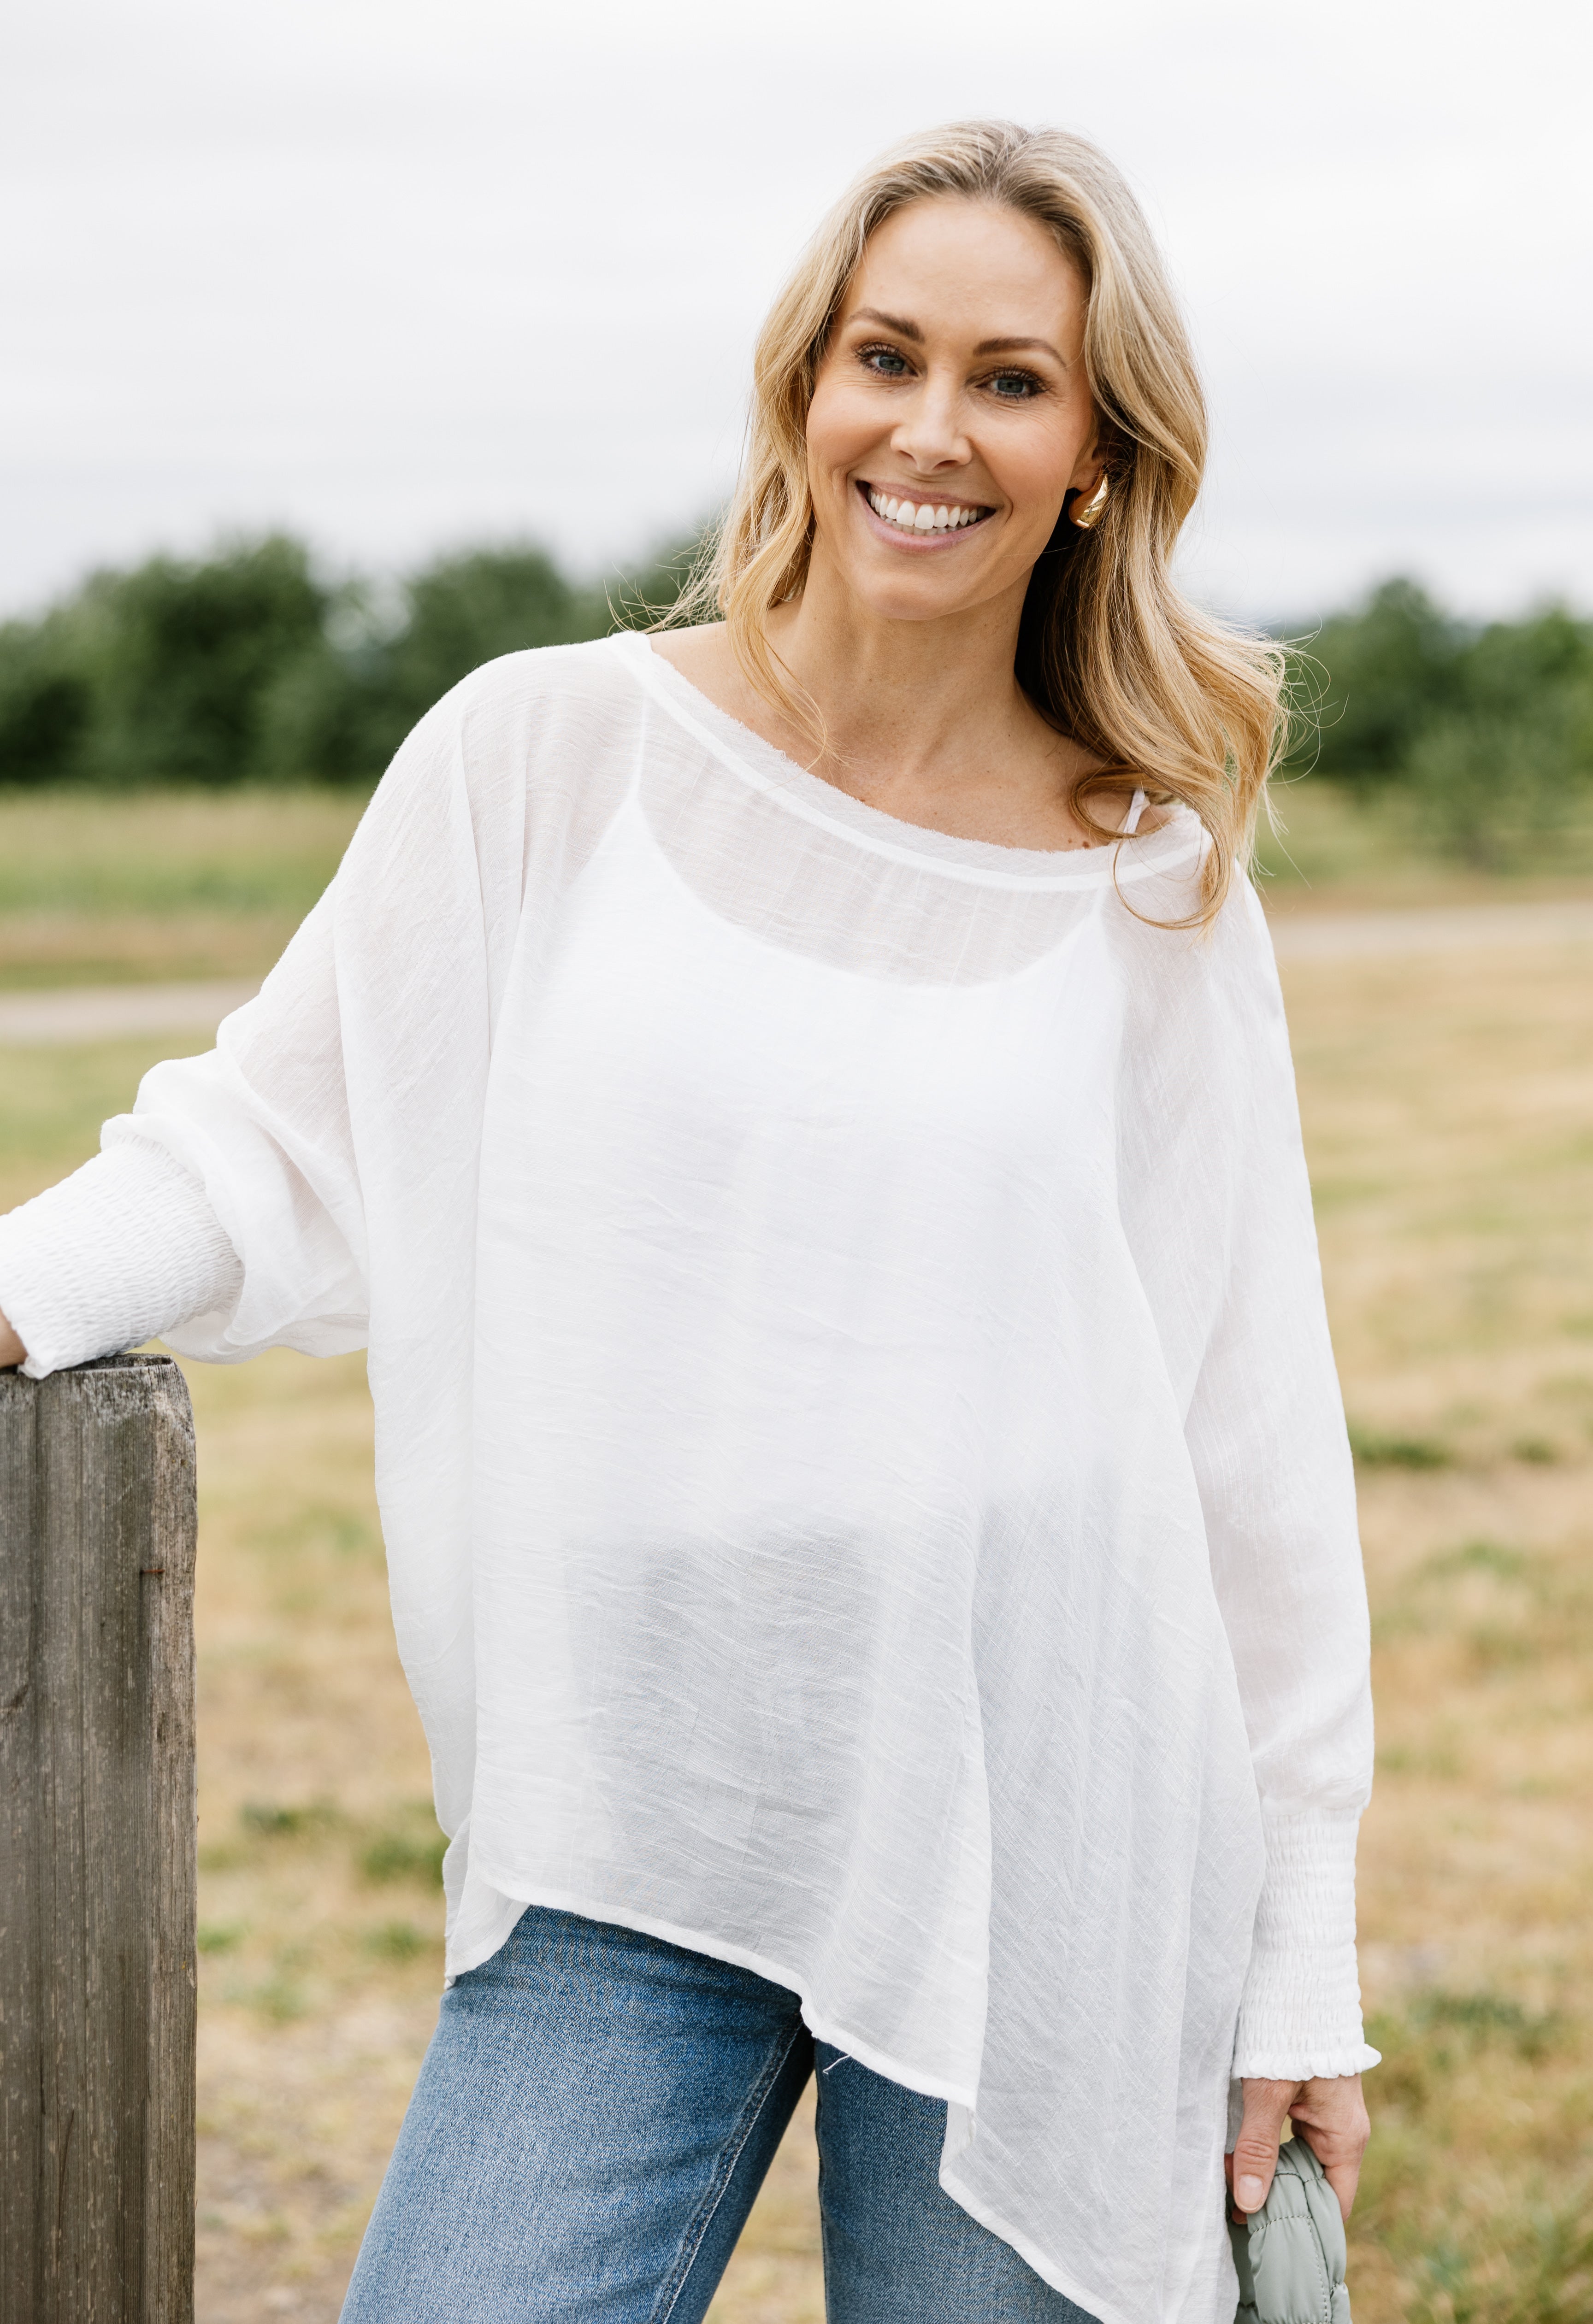 Easy Breezy Top - OFF WHITE - willows clothing Blouse